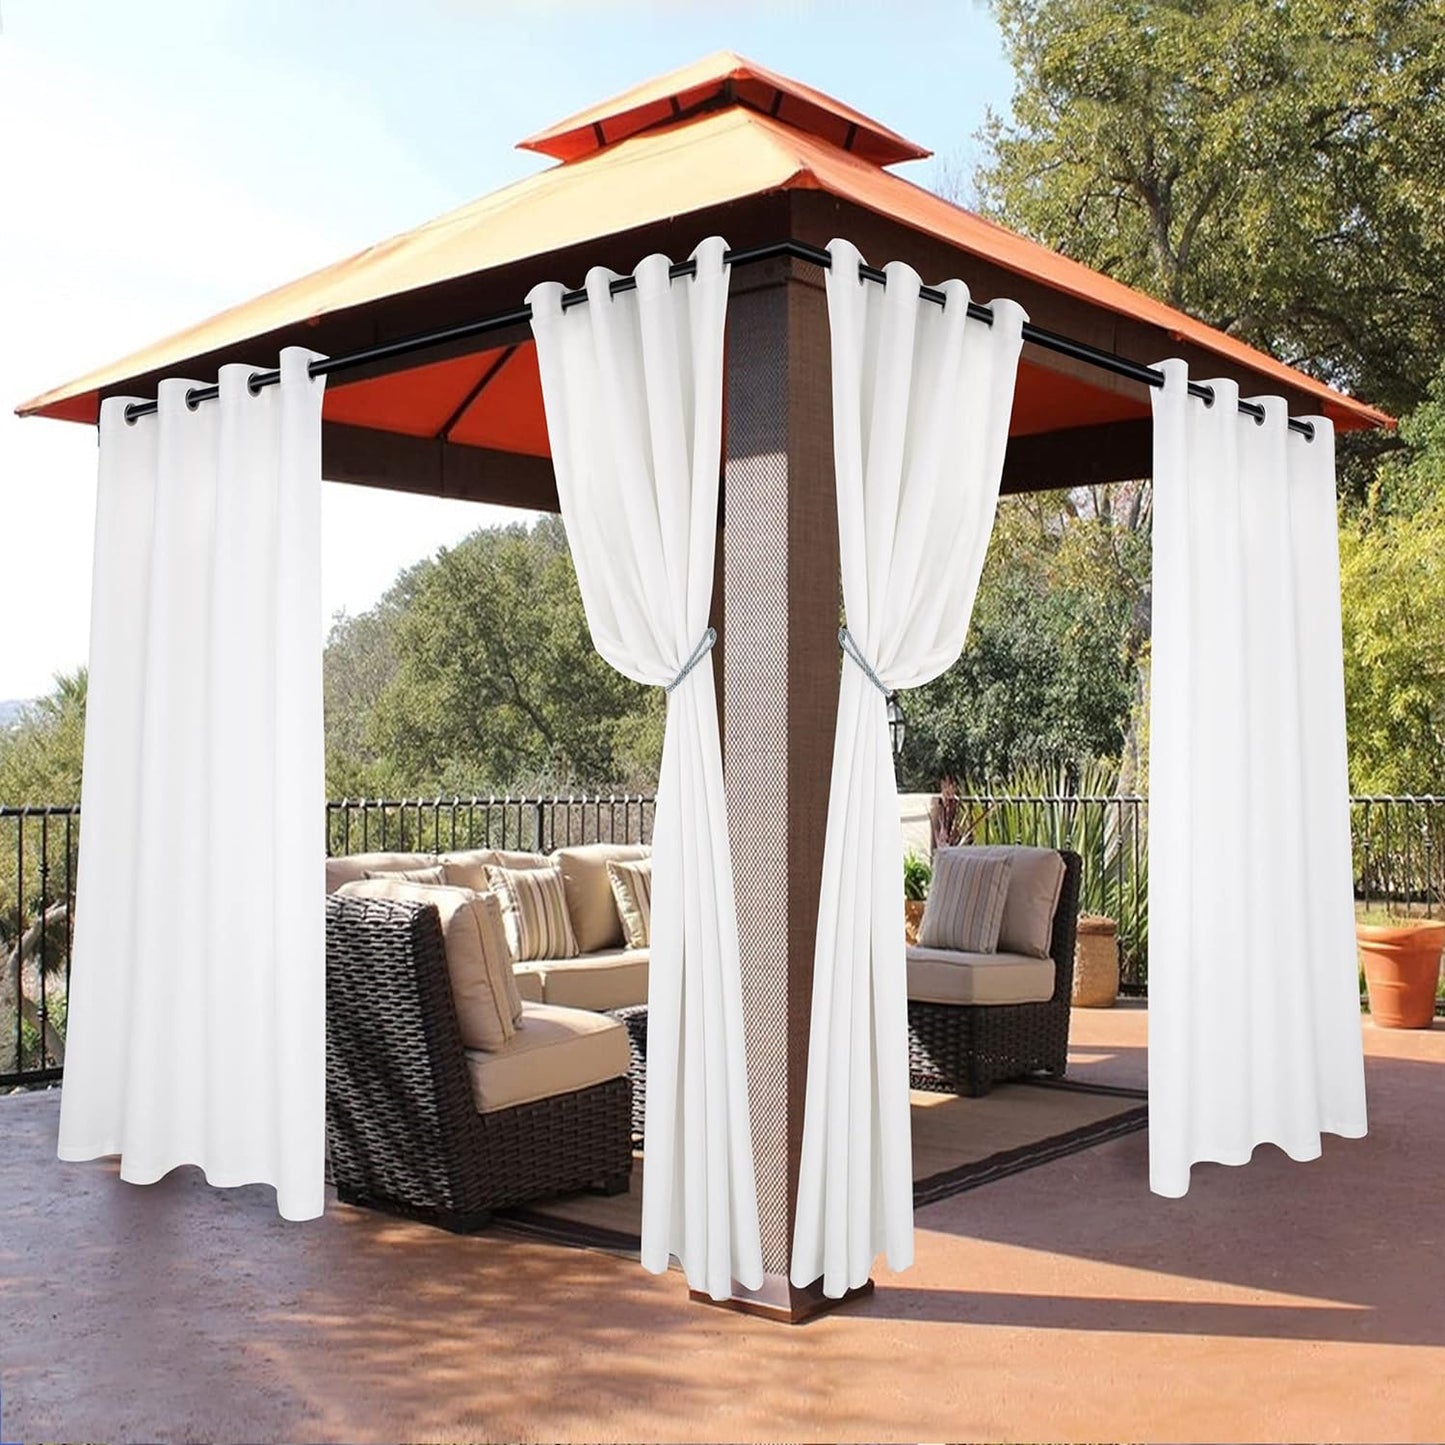 BONZER Outdoor Curtains for Patio Waterproof - Light Blocking Weather Resistant Privacy Grommet Blackout Curtains for Gazebo, Porch, Pergola, Cabana, Deck, Sunroom, 1 Panel, 52W X 84L Inch, Silver  BONZER White 52W X 84 Inch 